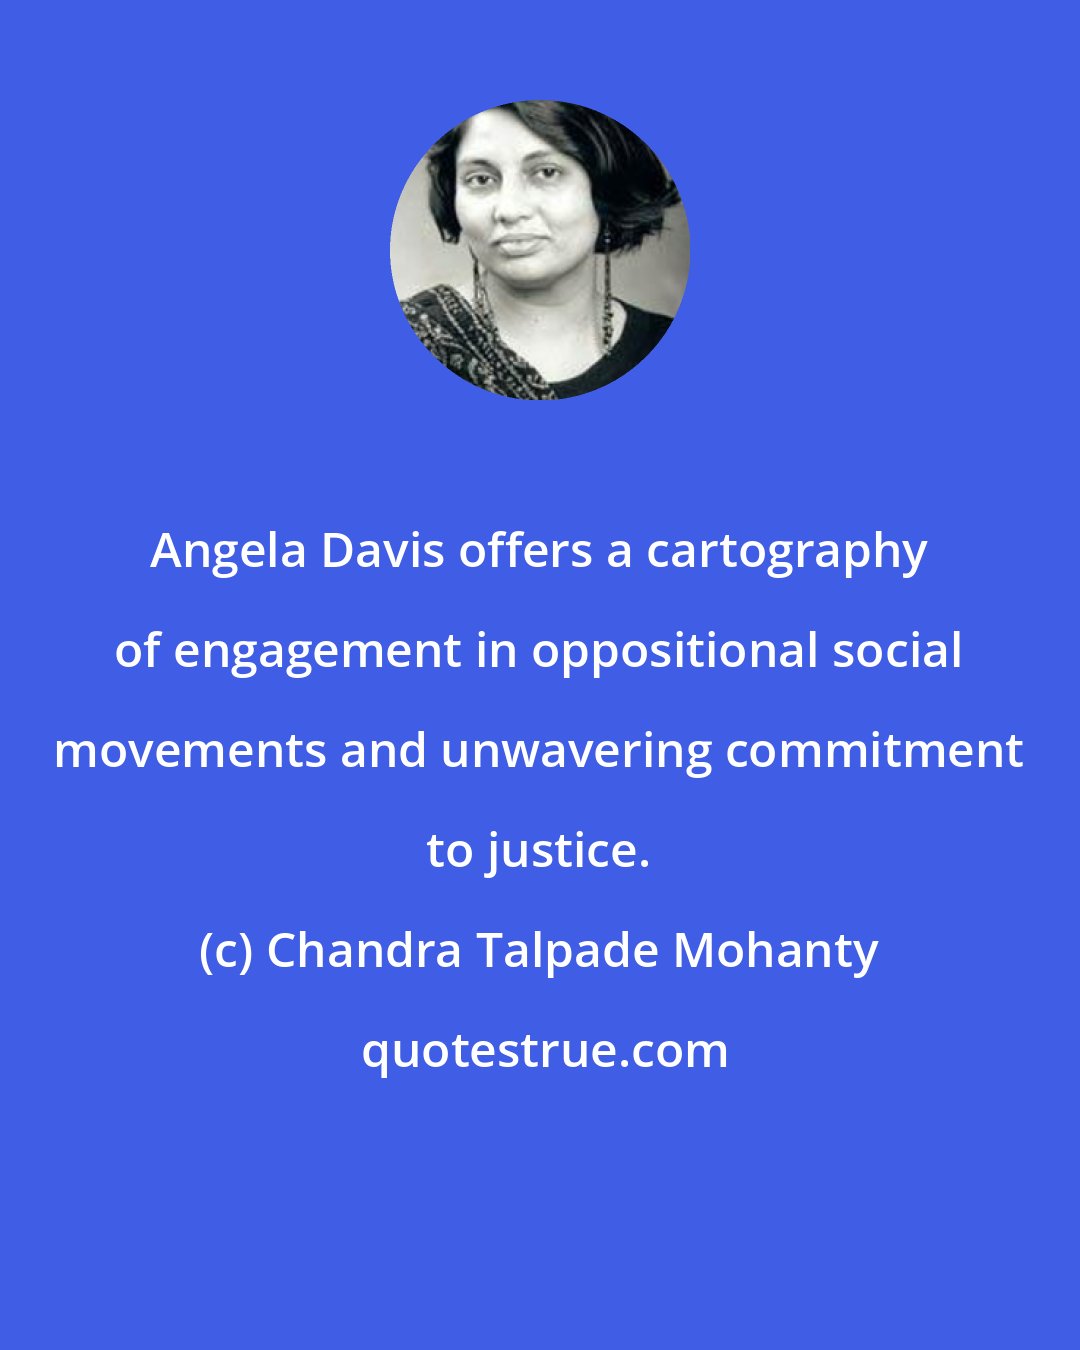 Chandra Talpade Mohanty: Angela Davis offers a cartography of engagement in oppositional social movements and unwavering commitment to justice.